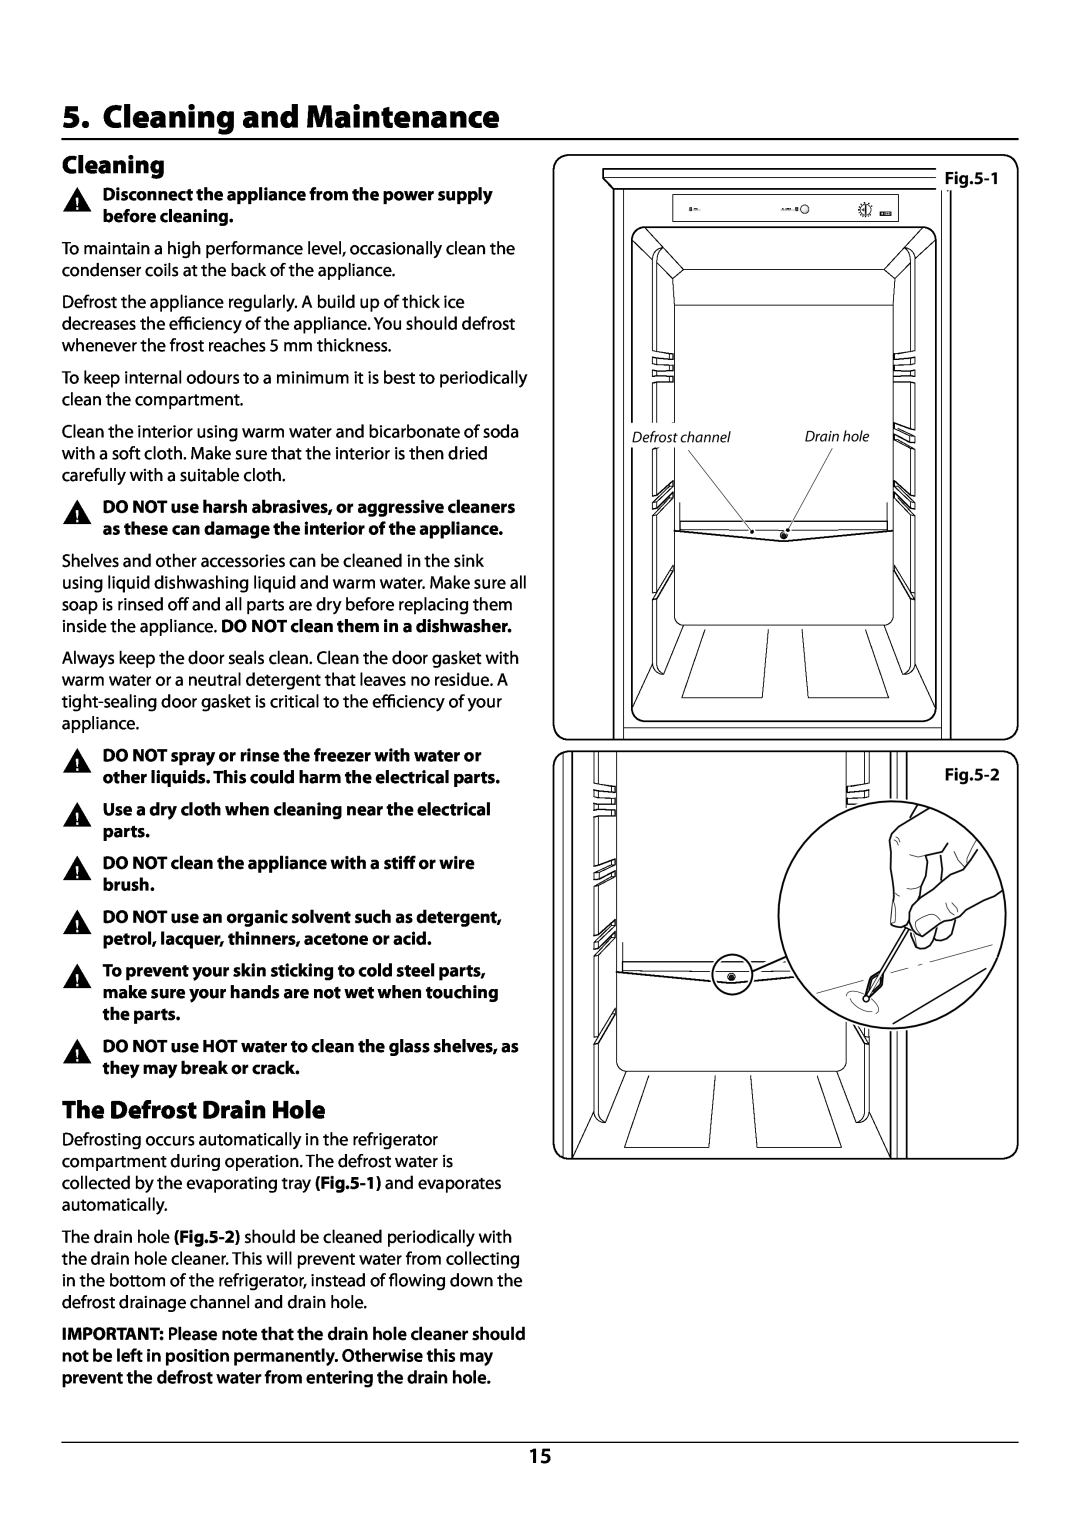 Rangemaster U110121 - 01A cleaning and Maintenance, the Defrost Drain Hole, Disconnect the appliance from the power supply 